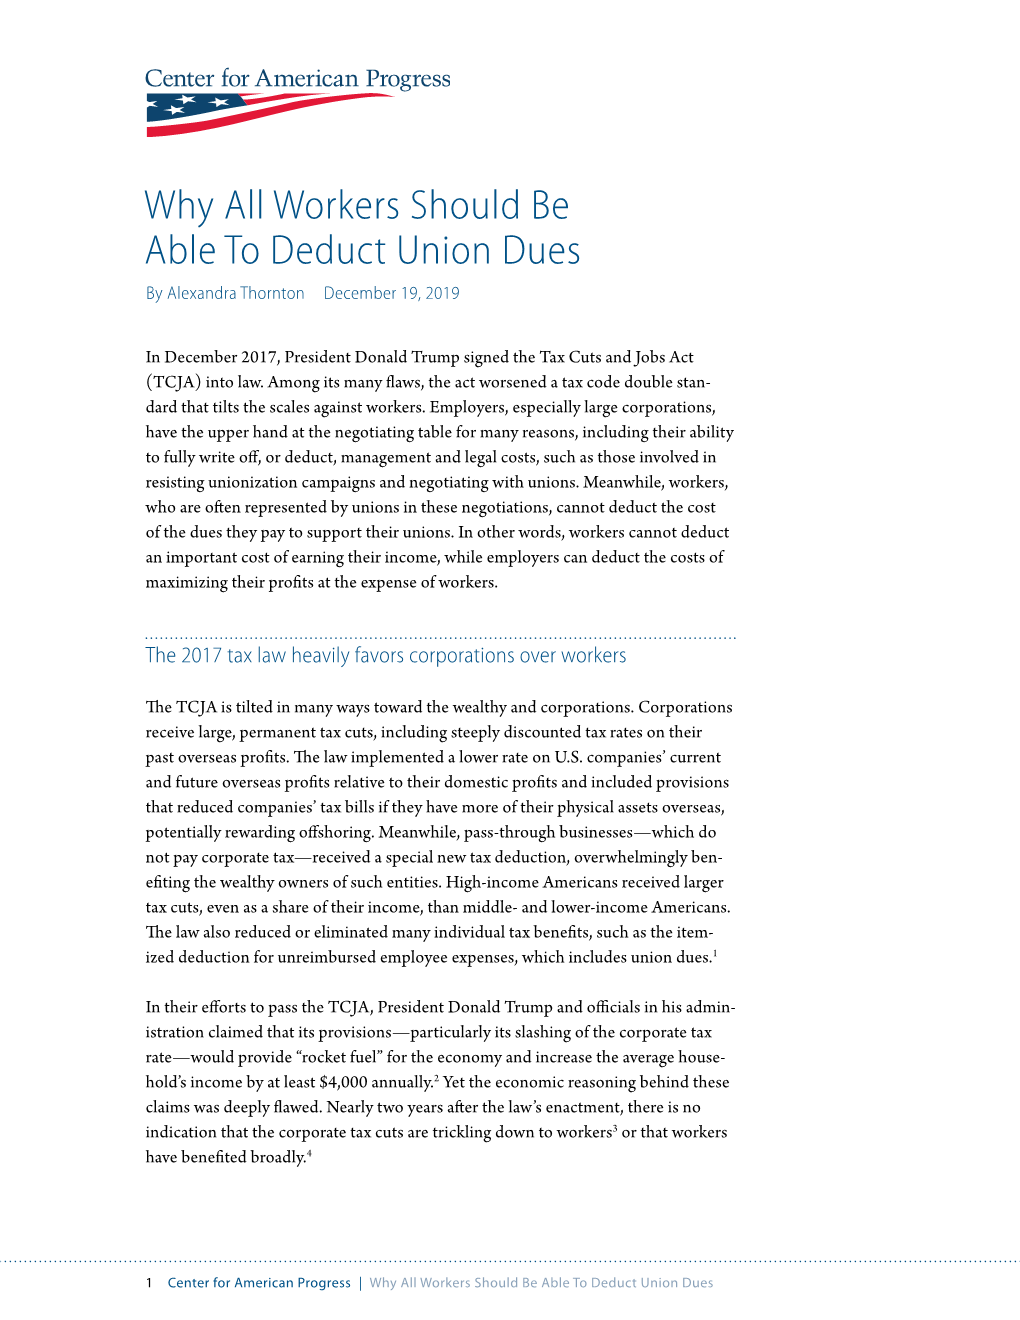 Why All Workers Should Be Able to Deduct Union Dues by Alexandra Thornton December 19, 2019